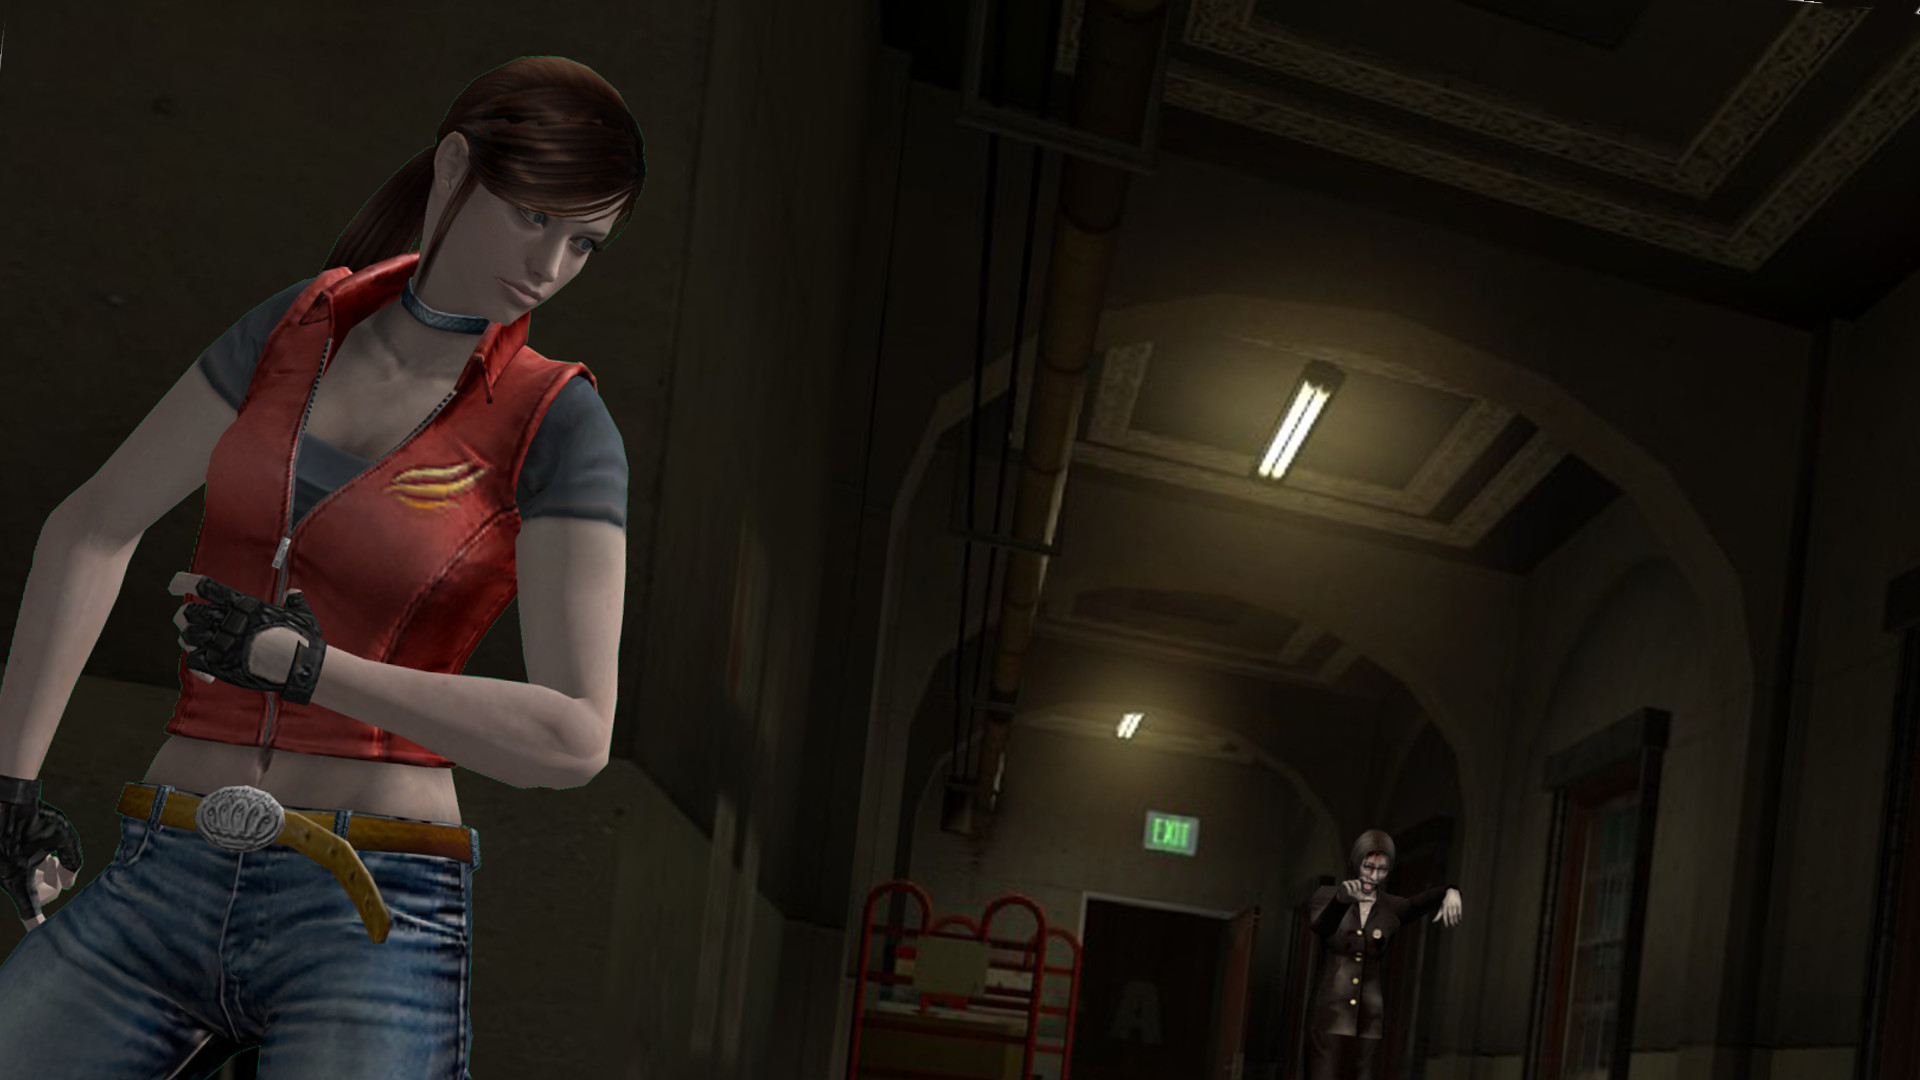 1920x1080 Resident Evil Claire Redfield Wallpaper